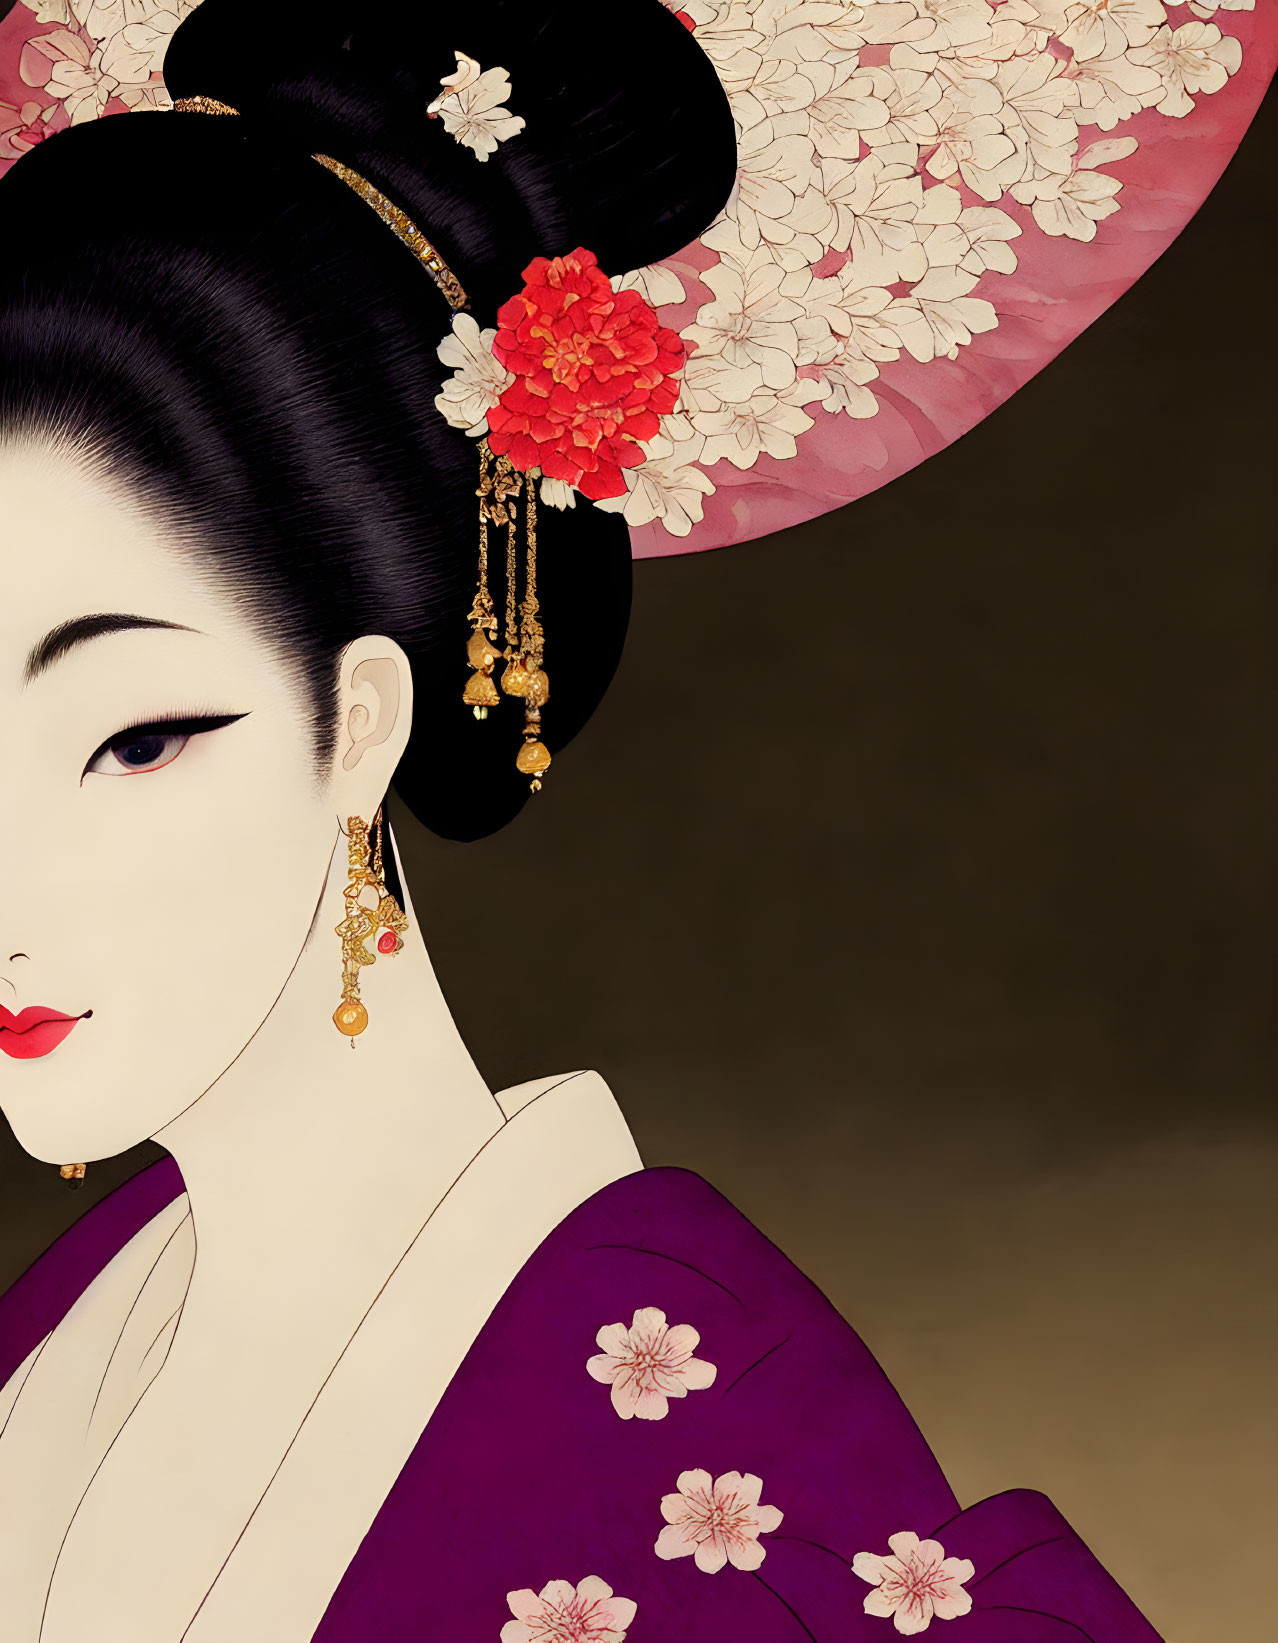 Geisha illustration with intricate hairstyle and floral jewelry on pink floral backdrop